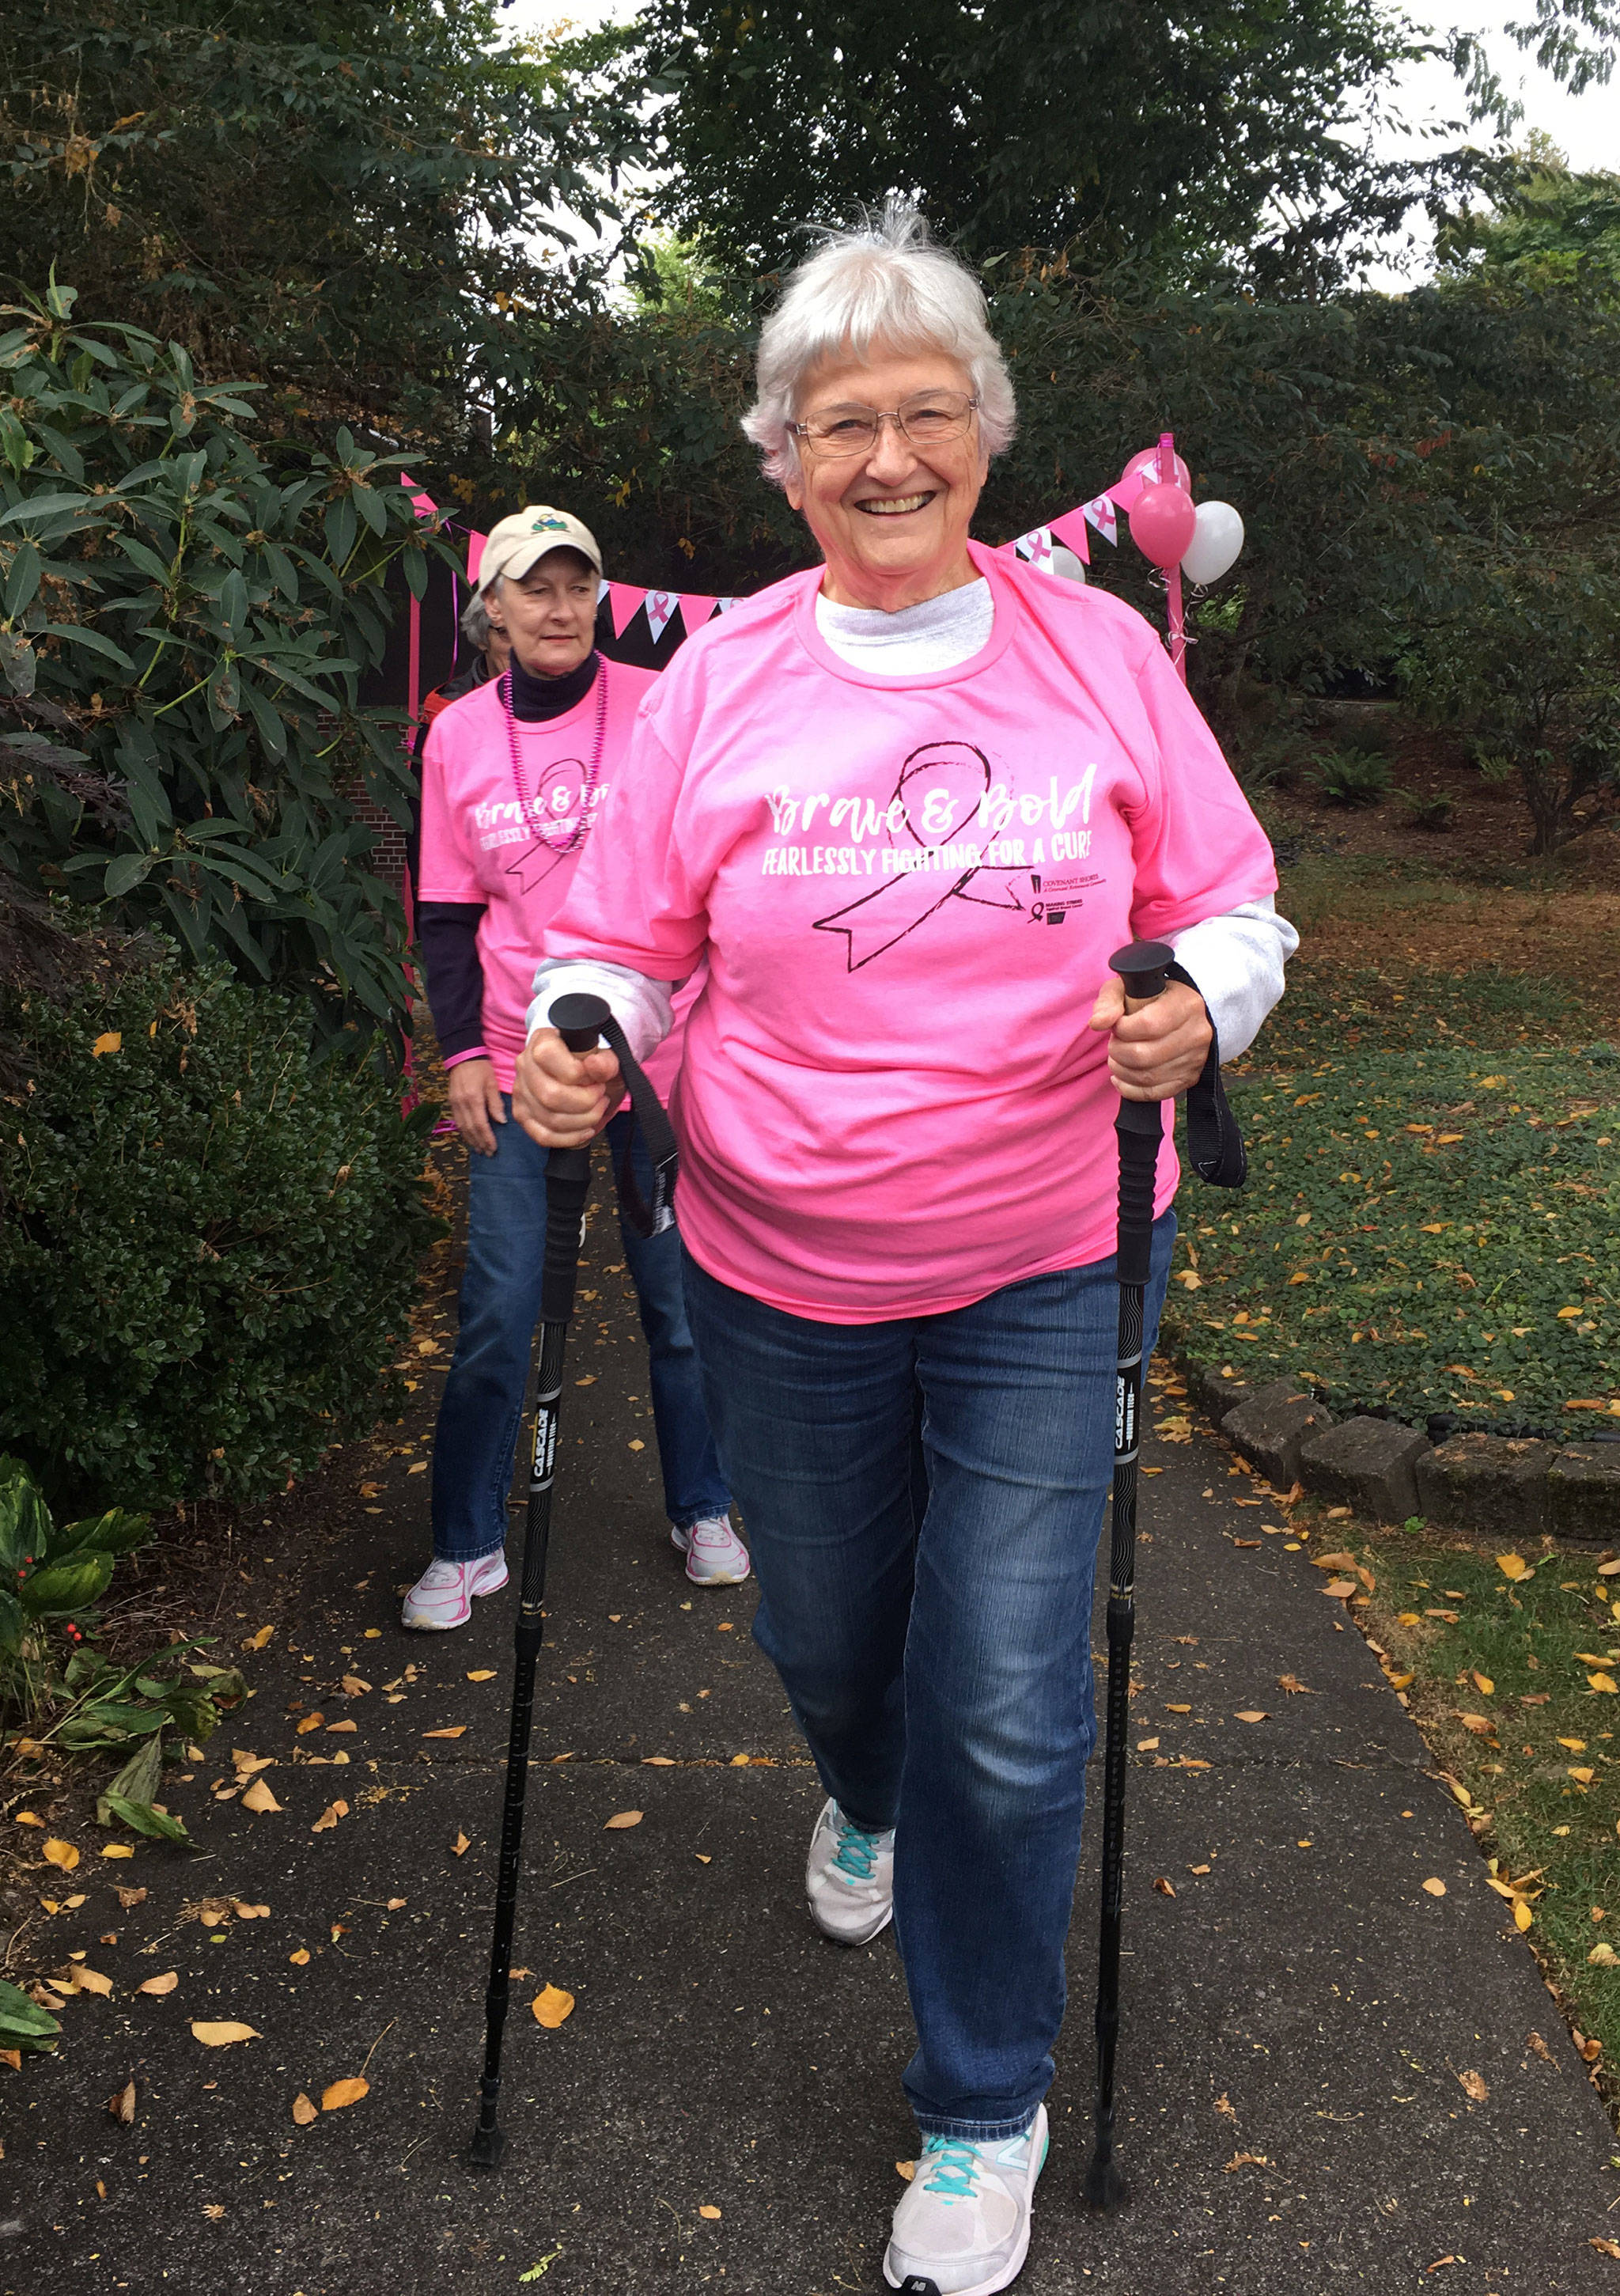 Cancer survivor Rita-Lou Clarke walks around the Covenant Shores campus to raise money for cancer research. Photo courtesy of Greg Asimakoupoulos